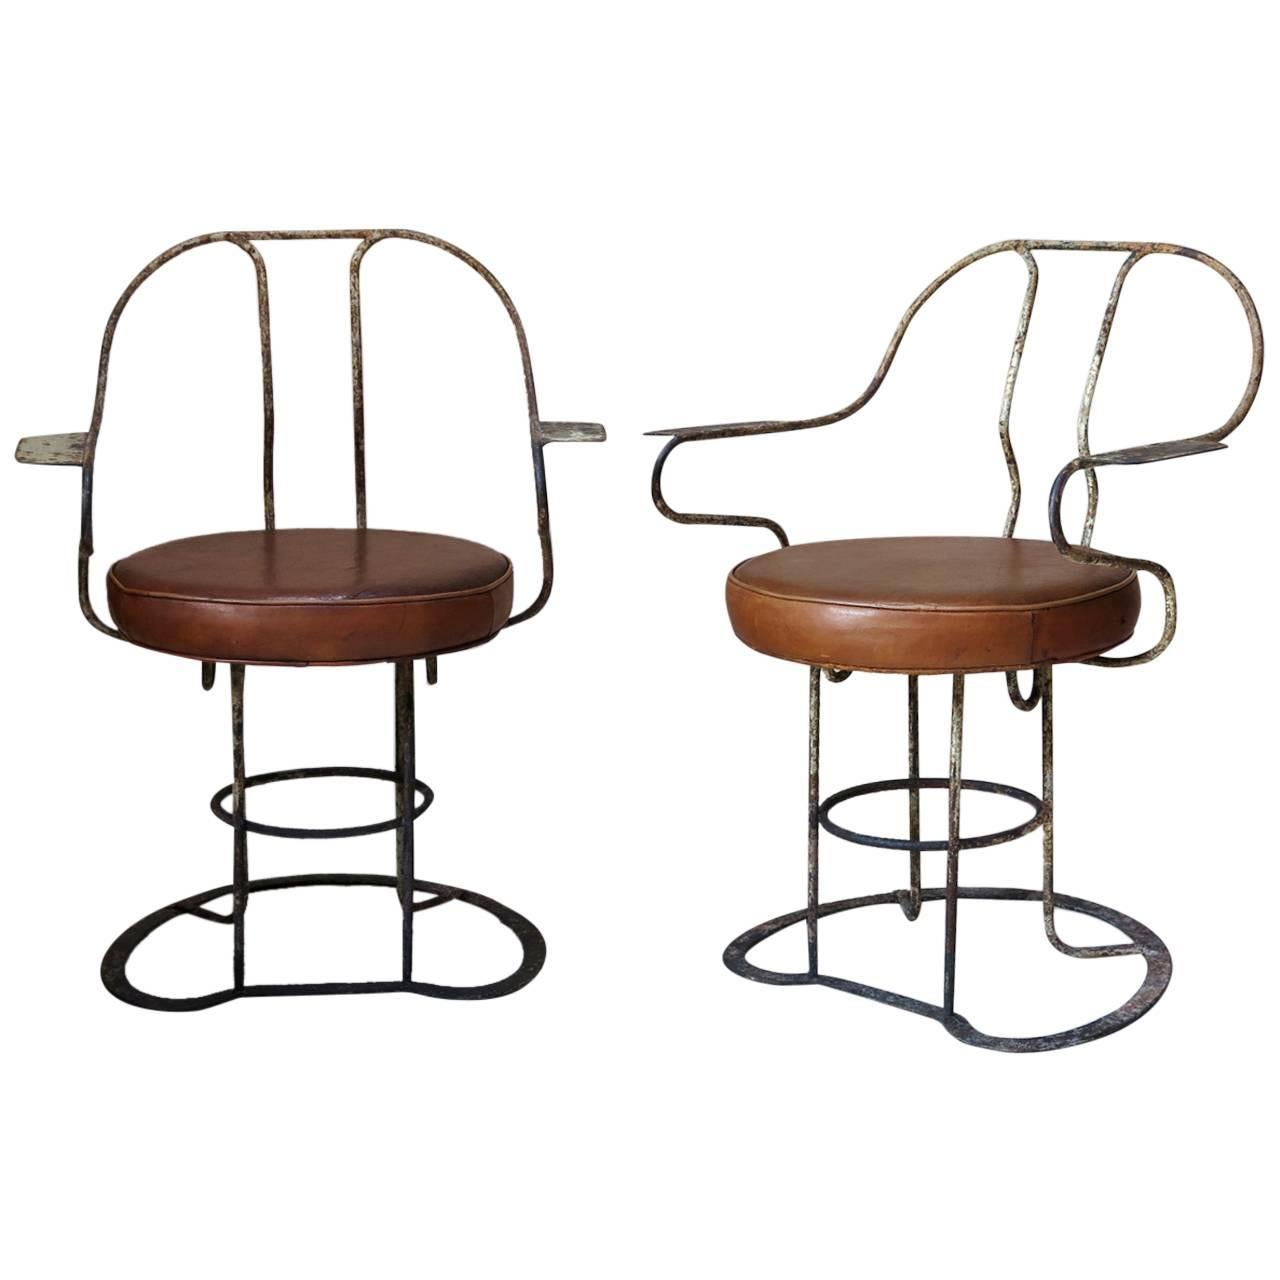 Unusual Pair of Iron and Leather Armchairs, France, circa 1930s For Sale